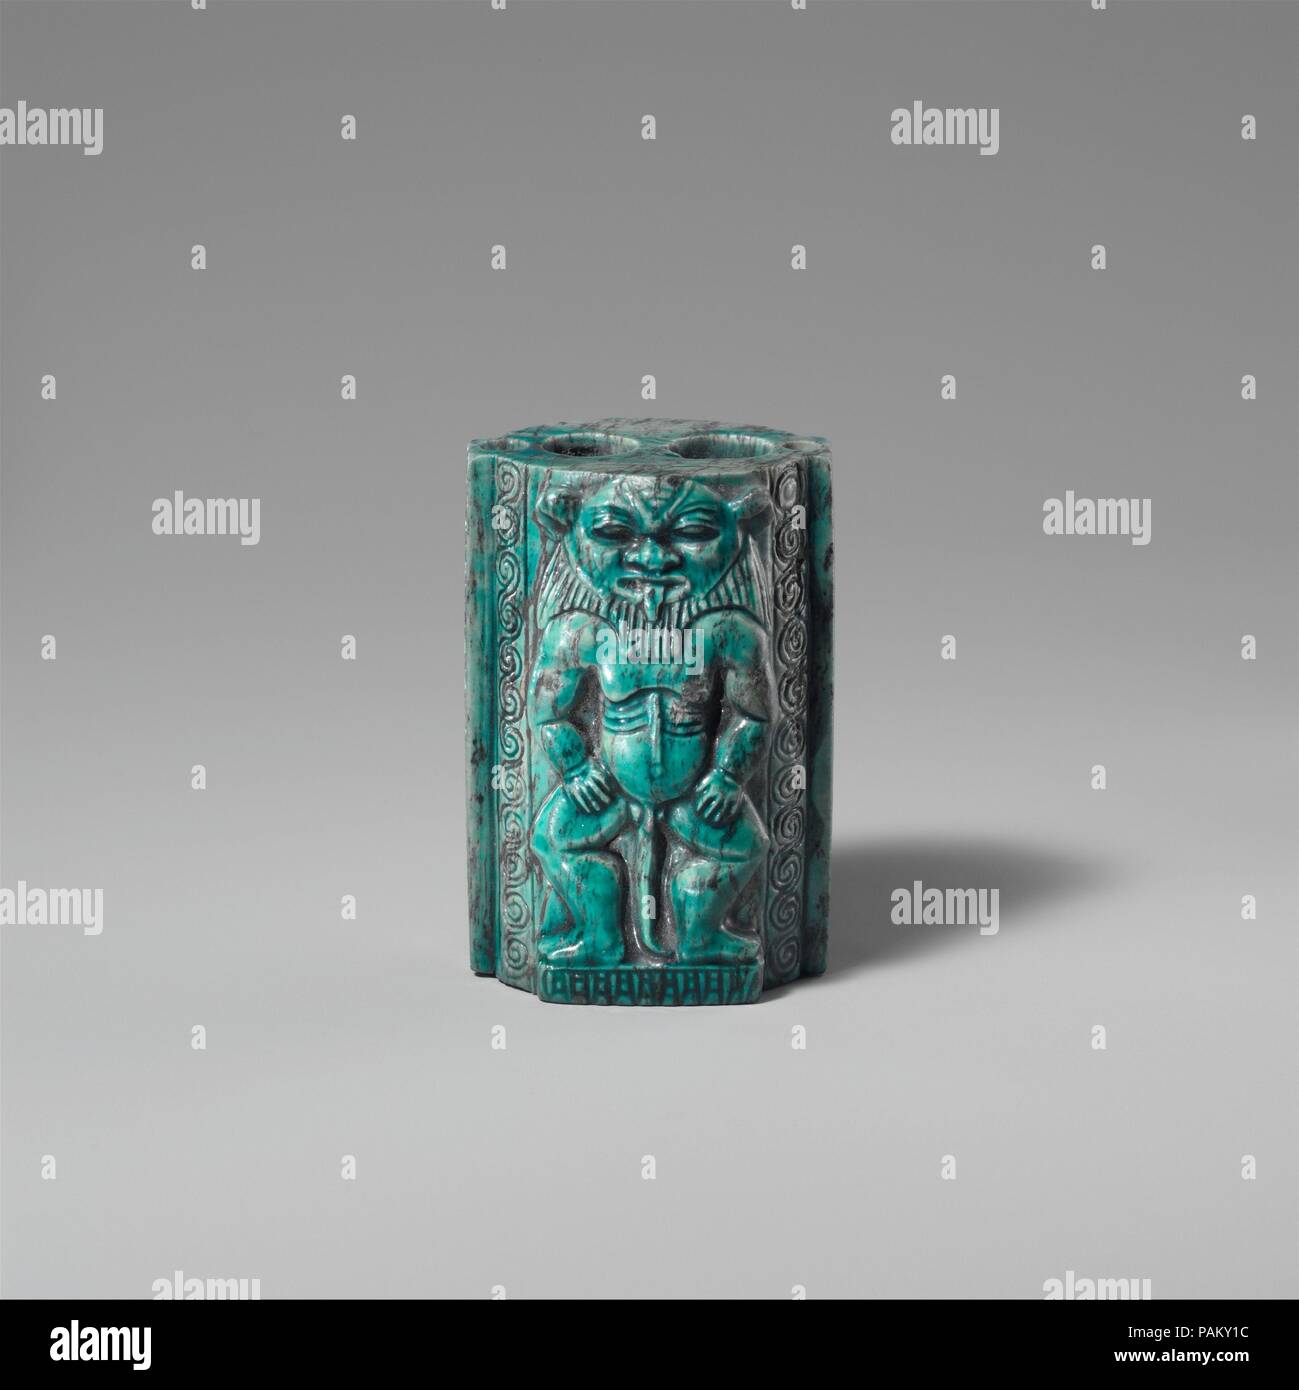 Kohl Container Decorated with Bes-images. Dimensions: H. 6 cm (2 3/8 in); w. 4 cm (1 9/16 in); d. 3.6 cm (1 7/16 in). Dynasty: mid-Dynasty 18. Date: ca. 1400 B.C..  As a measure for preventing disease, eye paint was second only to water in ancient Egypt. It was prepared from malachite and galena, ground on slate palettes, mixed with fat, and then applied around the eyes using a small stick, or applicator. Green eye paint, made from malachite, was primarily cosmetic. Galena is black in color, and the paint derived from it helped to reflect the glare of the Egyptian sun. More importantly, its le Stock Photo